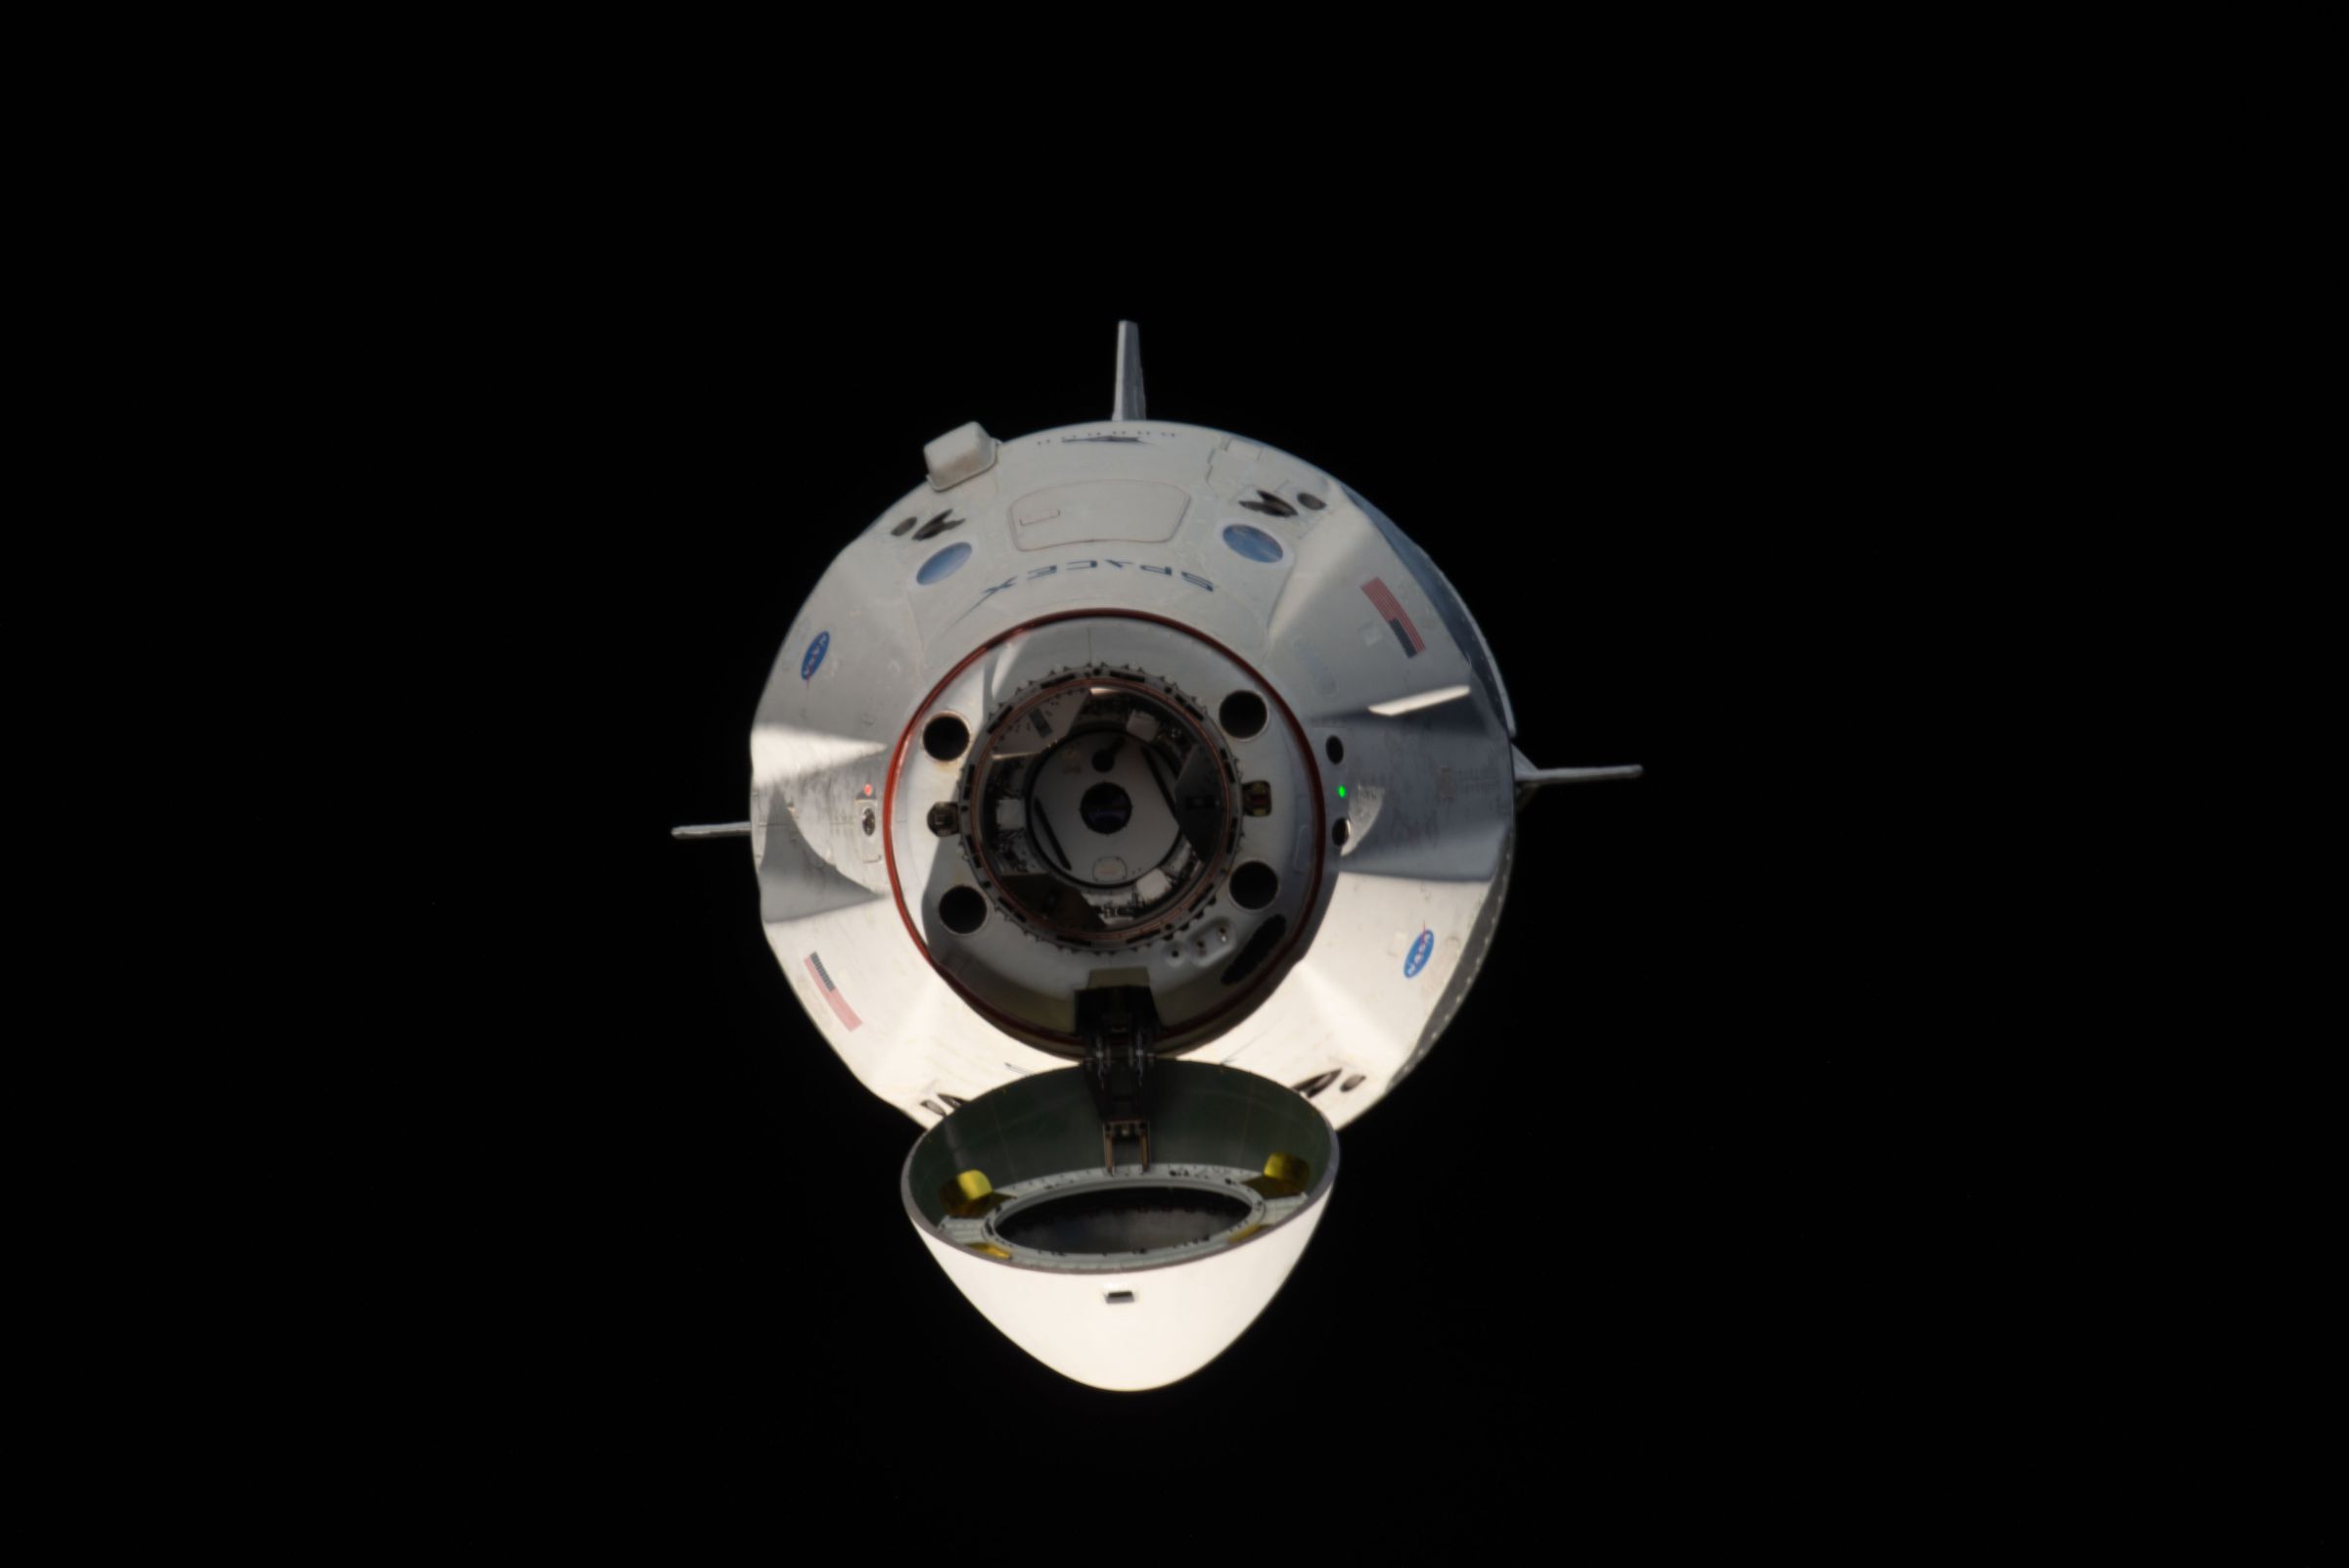 SpaceX’s Crew Dragon, as it approached the space station on Sunday